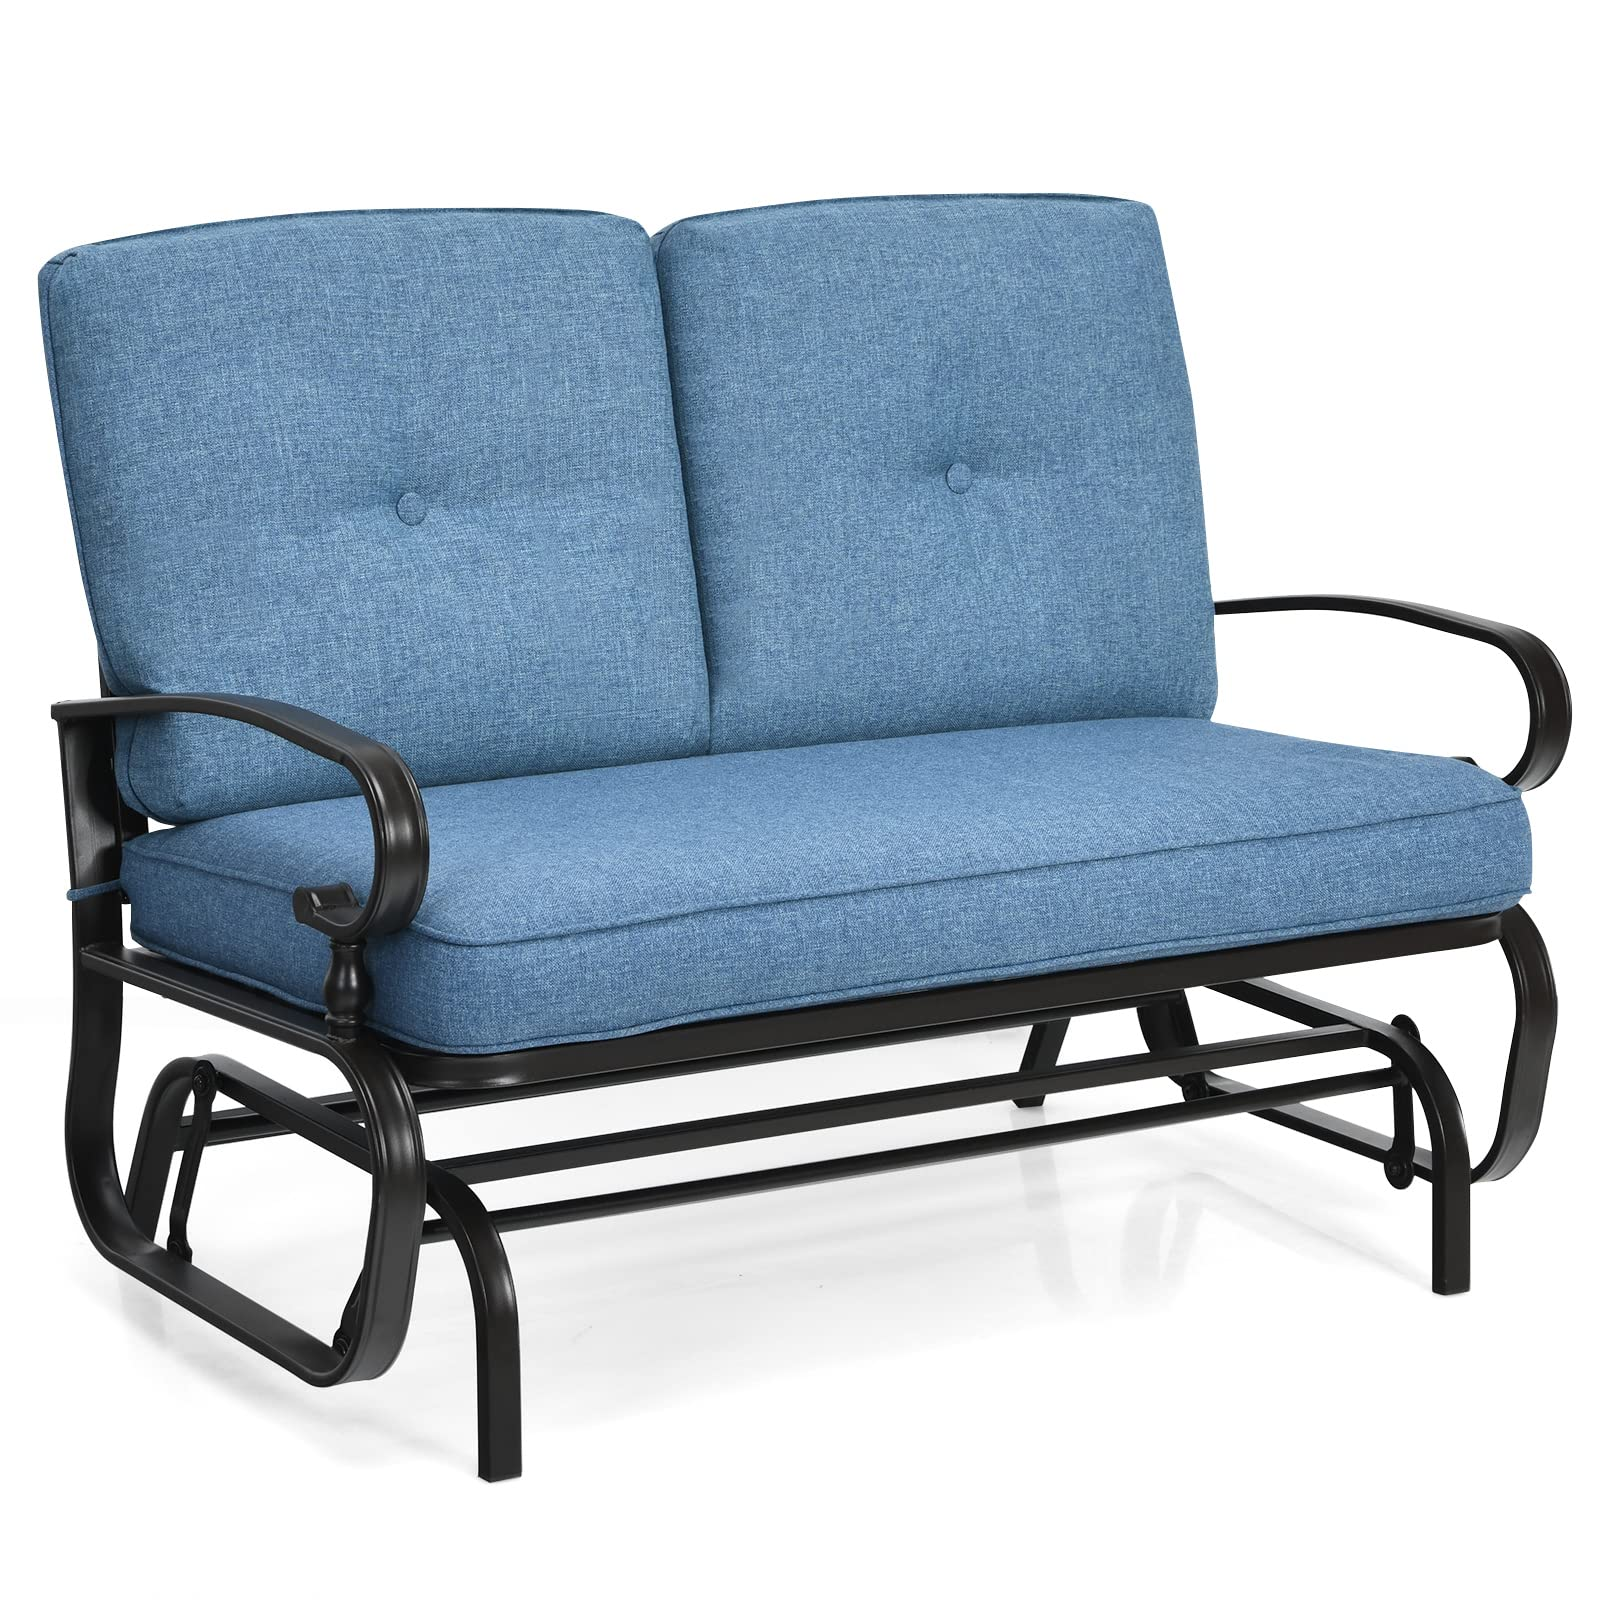 Giantex Outdoor Glider Bench Patio Loveseat with Cushions